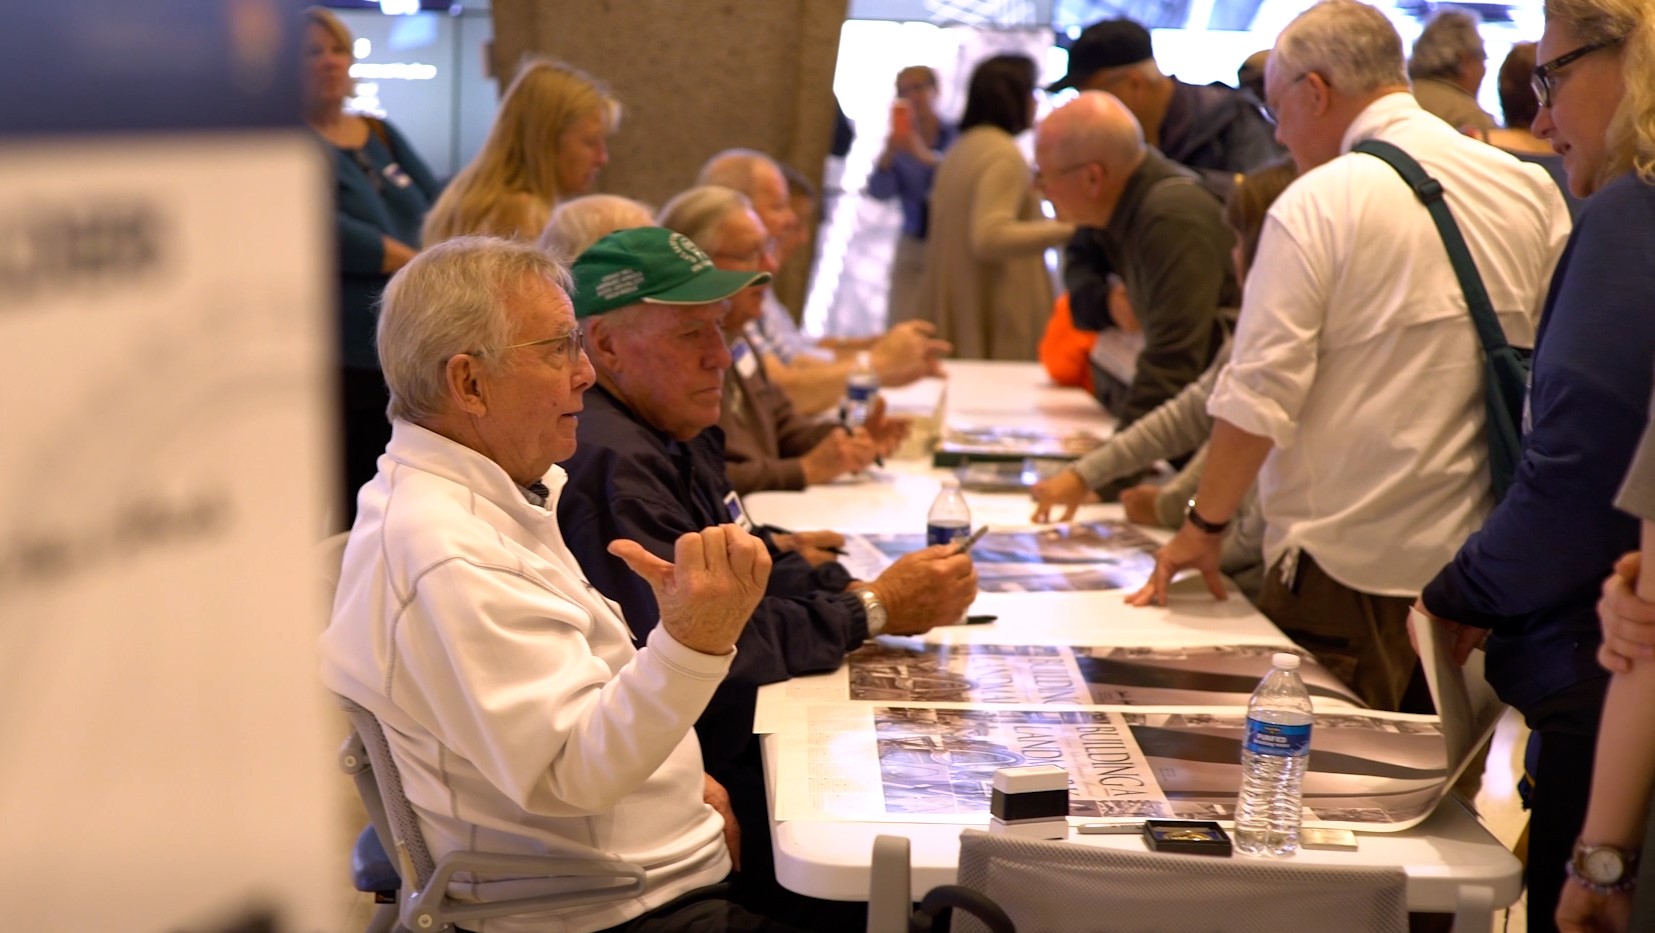 Builders of the Gateway Arch sit behind a table and talk with visitors during the annual Meet the Builders event at the Arch.